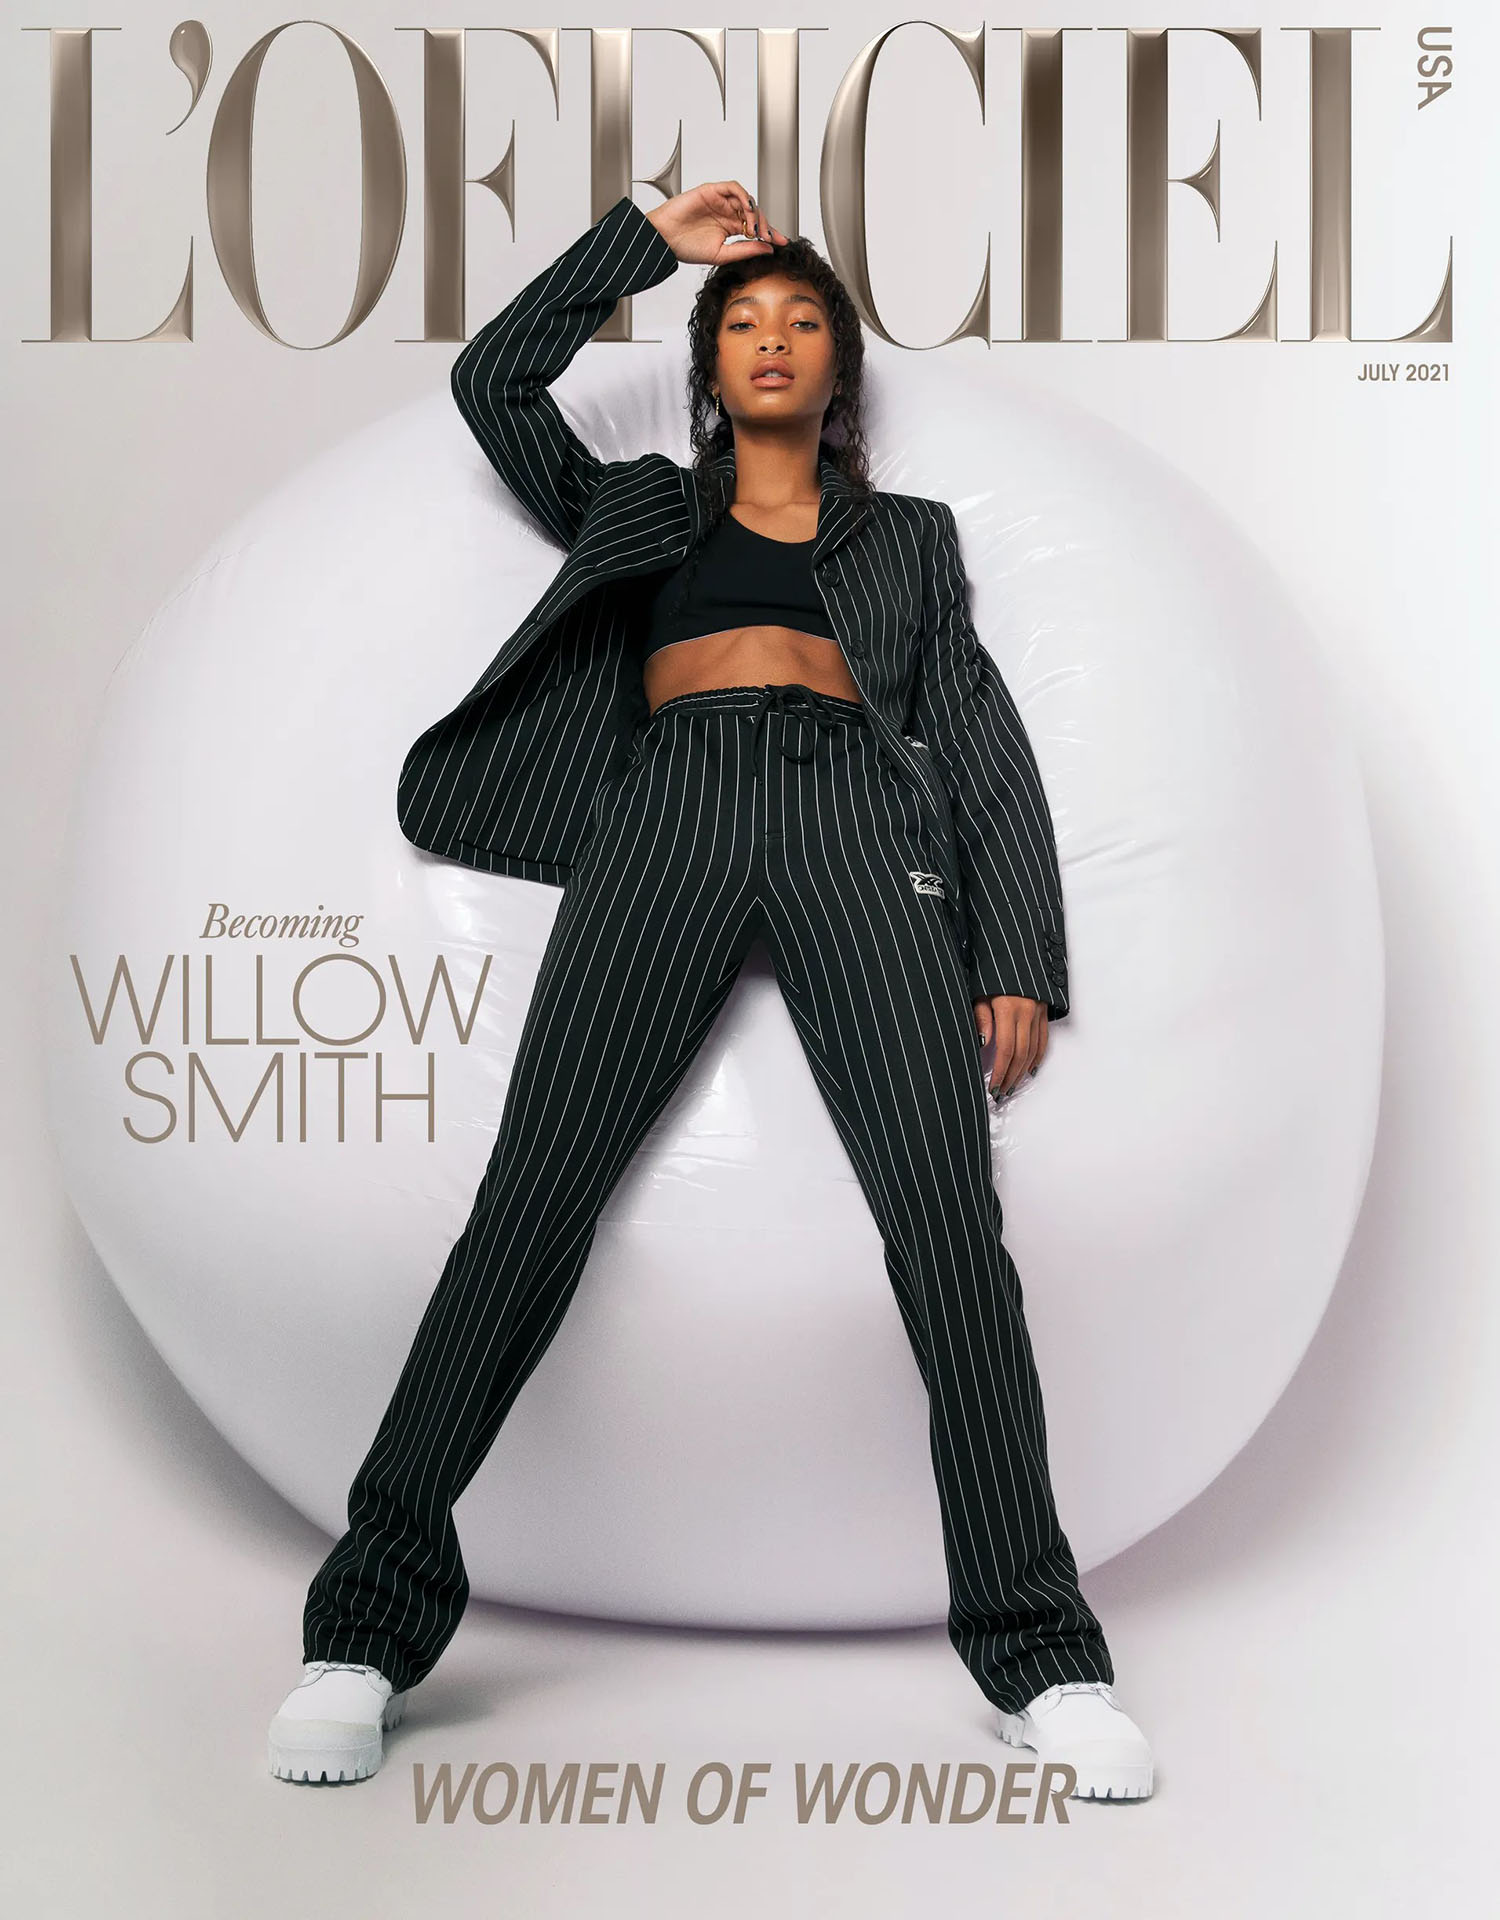 Willow Smith covers L’Officiel USA July 2021 and L’Officiel Italia Issue 38 by Myles Loftin